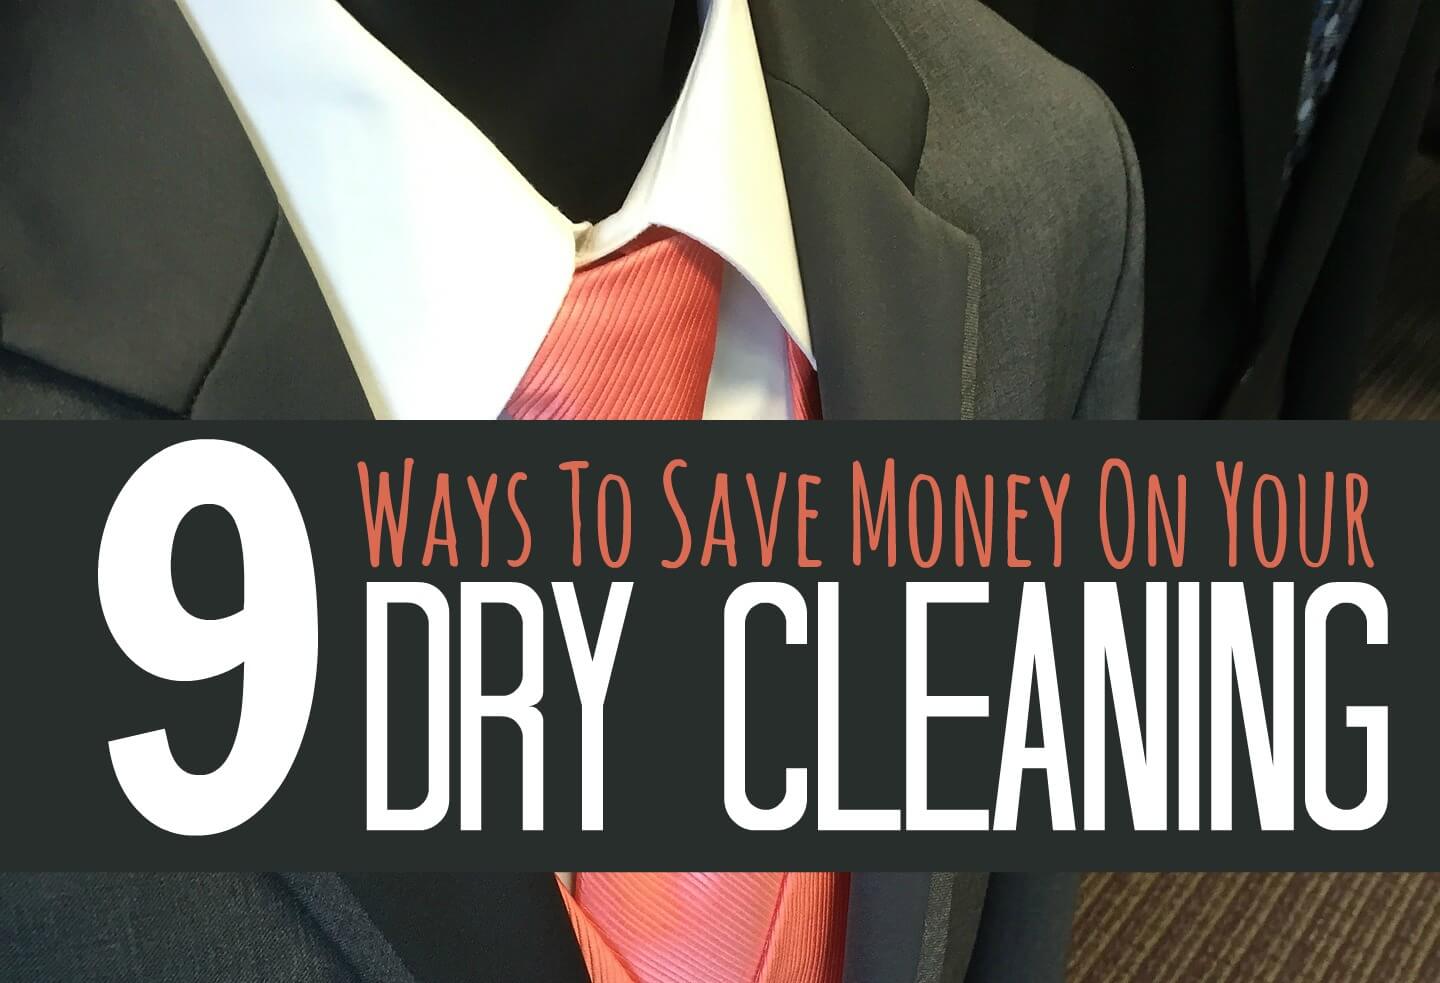 How Dryel saves me time and money on dry cleaning (giveaway